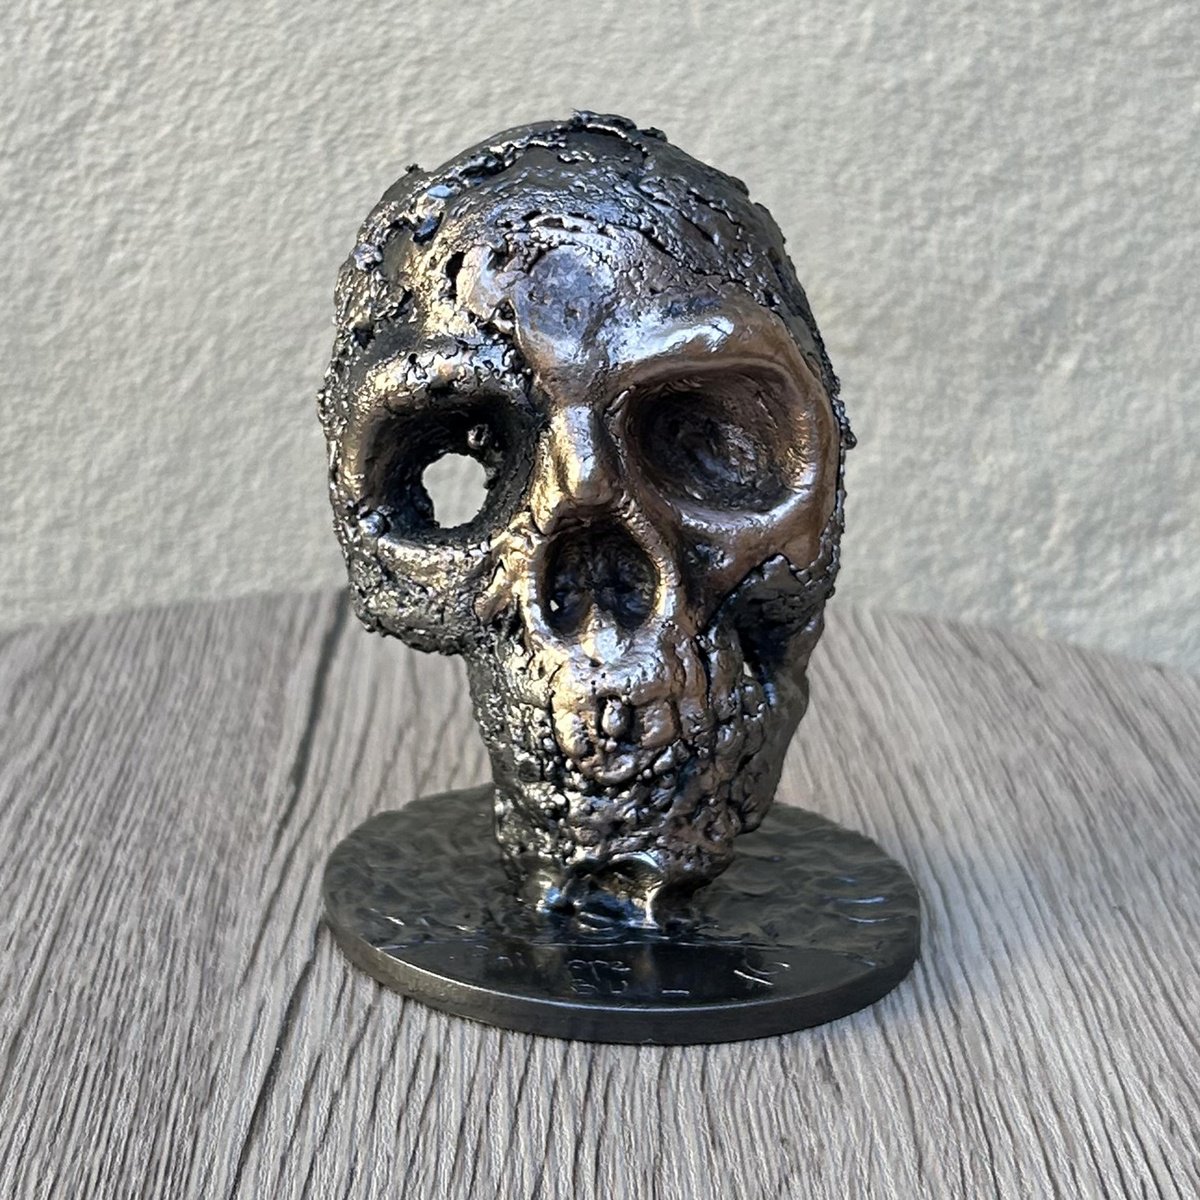 Skull 74-23 by Philippe Buil